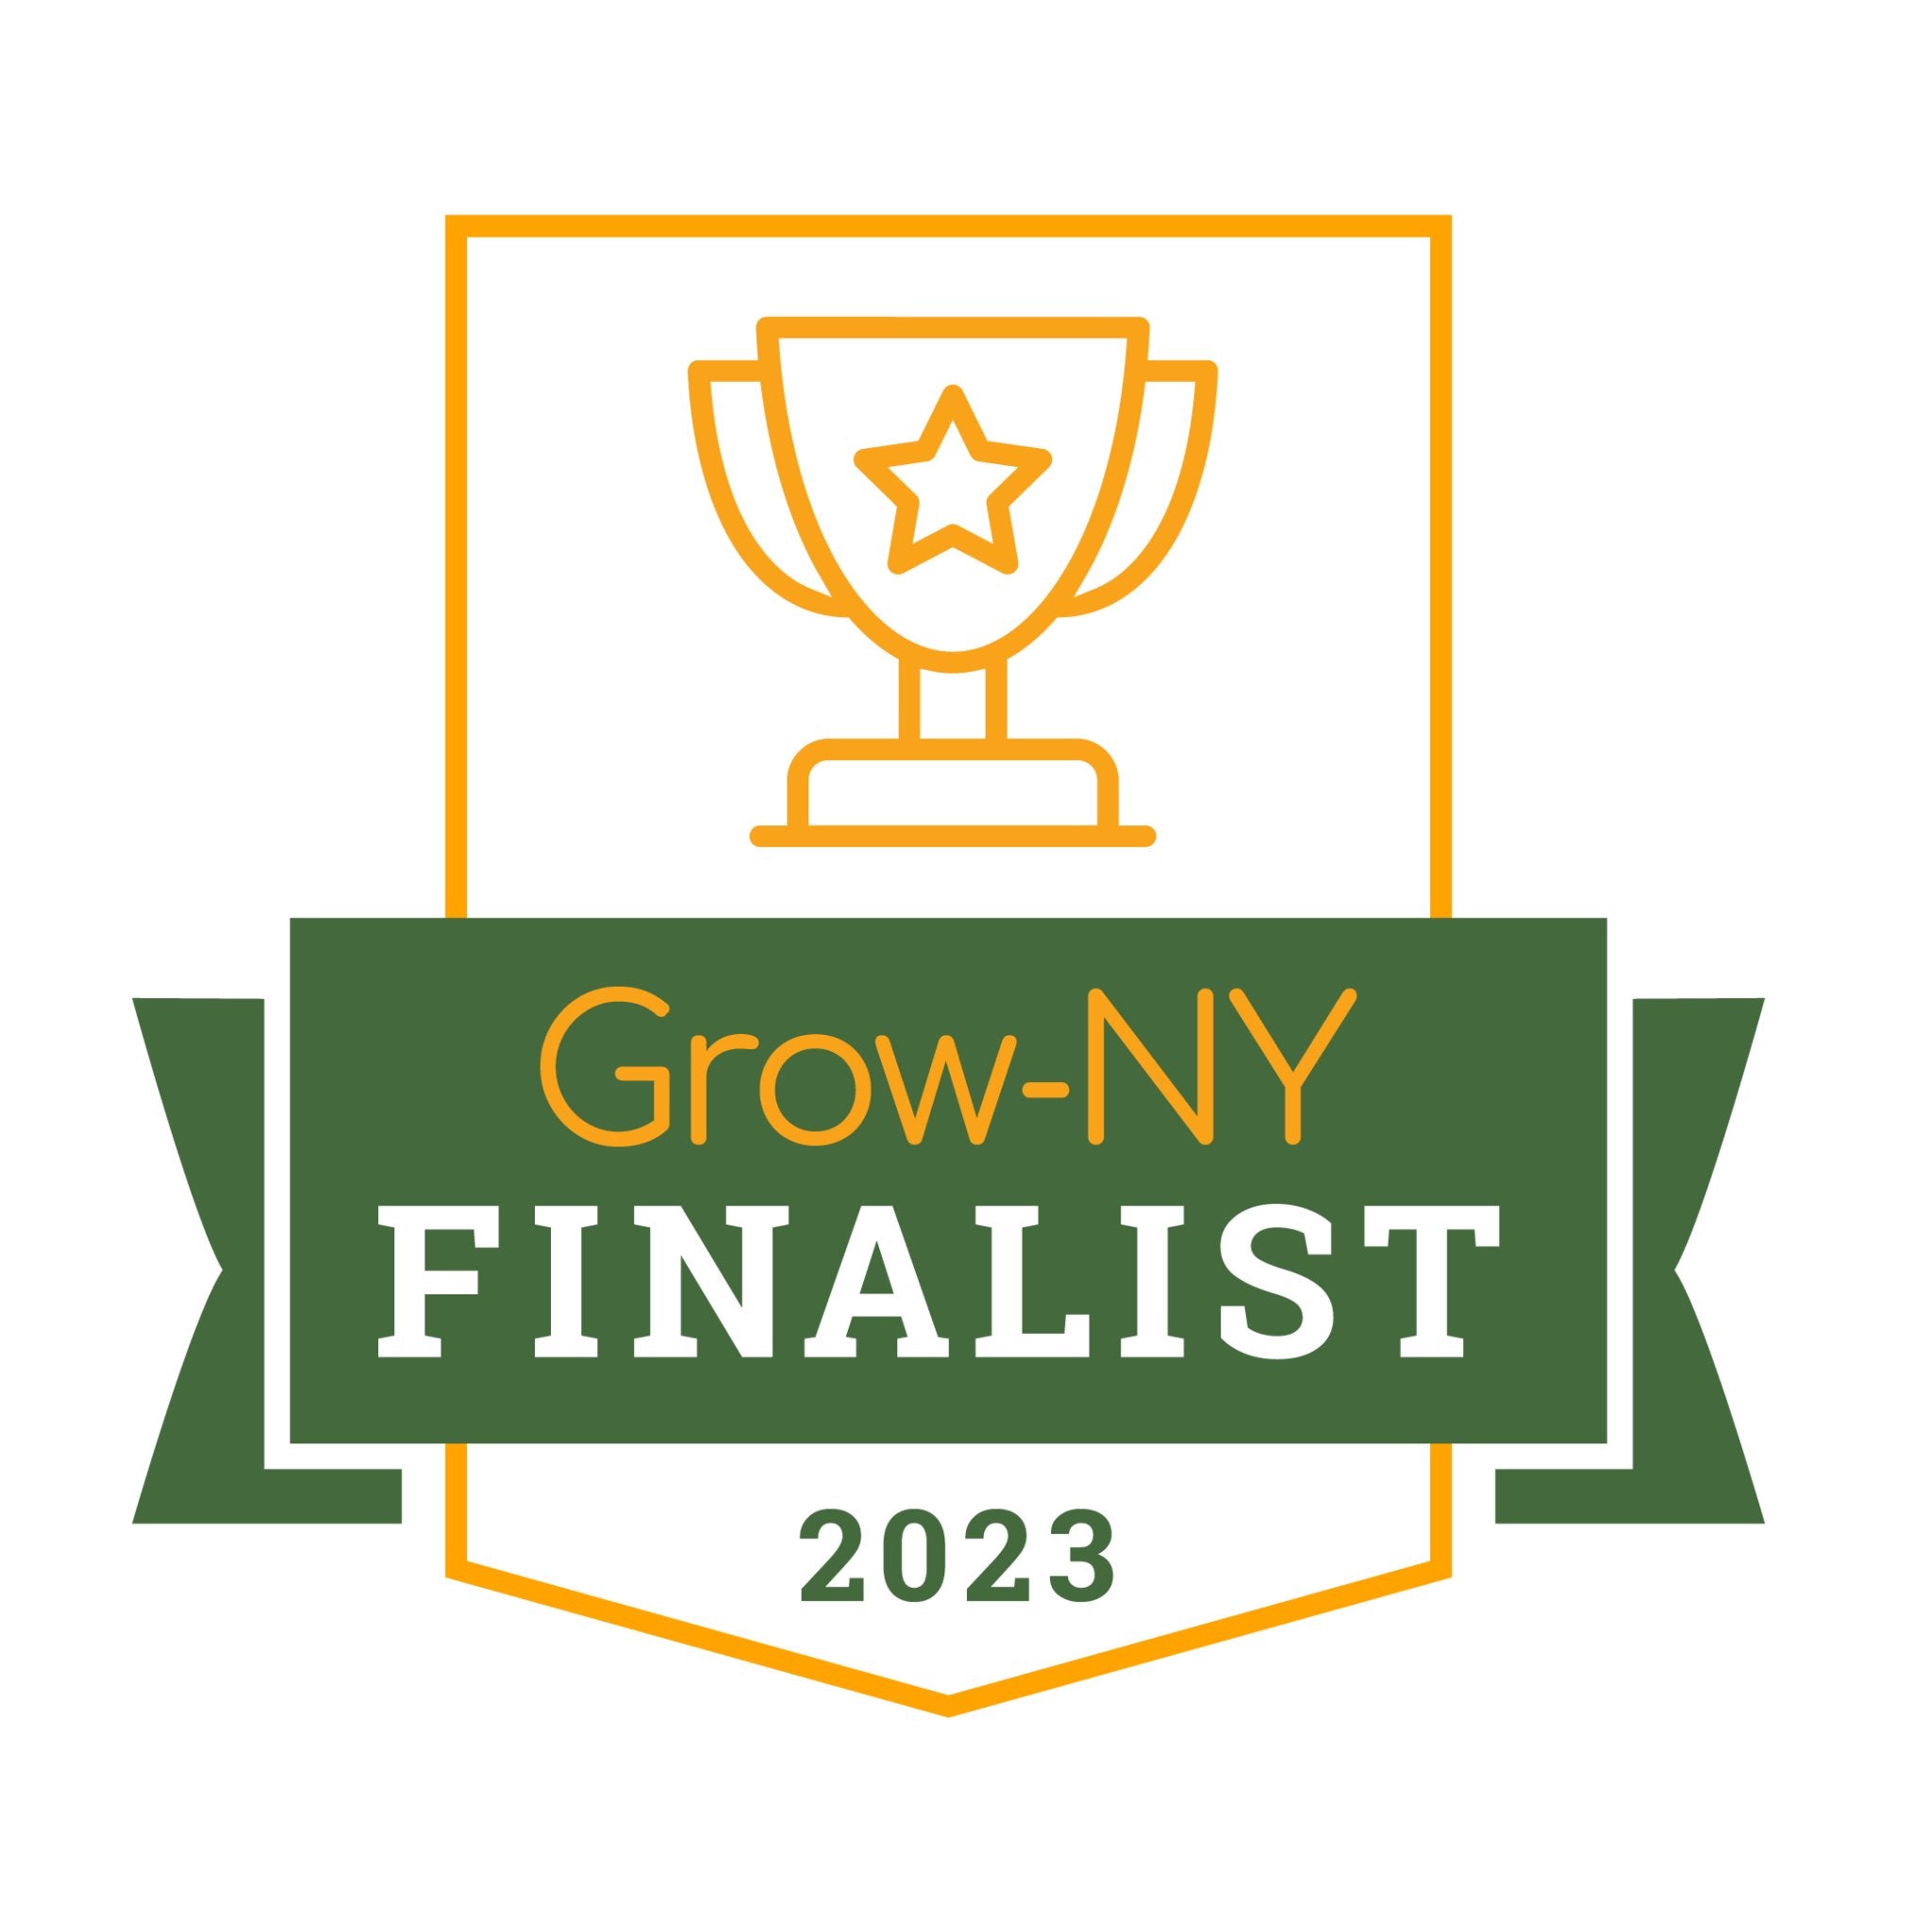 Cornell-Backed Startup Selected as Finalist in $3 Million Grow-NY Food and Agriculture Competition